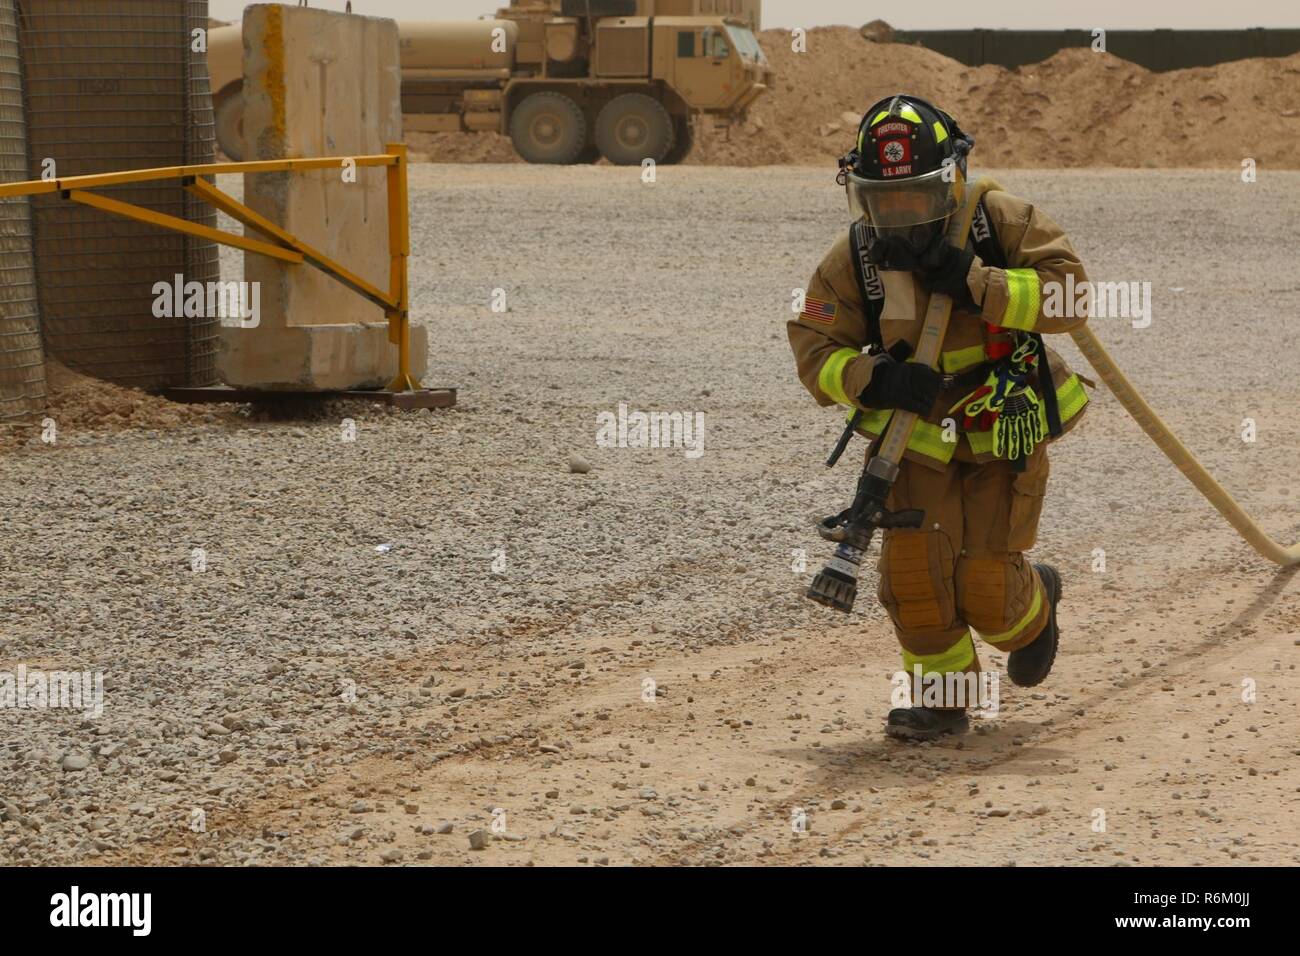 A U.S. Army Soldier, deployed in support of Combined Joint Task Force-Operation Inherent Resolve, competes in a firefighters’ physical training challenge at Qayyarah West Airfield, Iraq, May 19, 2017. The Soldier, assigned to the “Q-West” firefighters team consisting of members from the 562nd Firefighter Detachment and 514th Firefighter Detachment, helped create this challenge to bring different units on Qayyarah West Airfield together and promote physical fitness. CJTF-OIR is the global Coalition to defeat ISIS in Iraq and Syria. Stock Photo